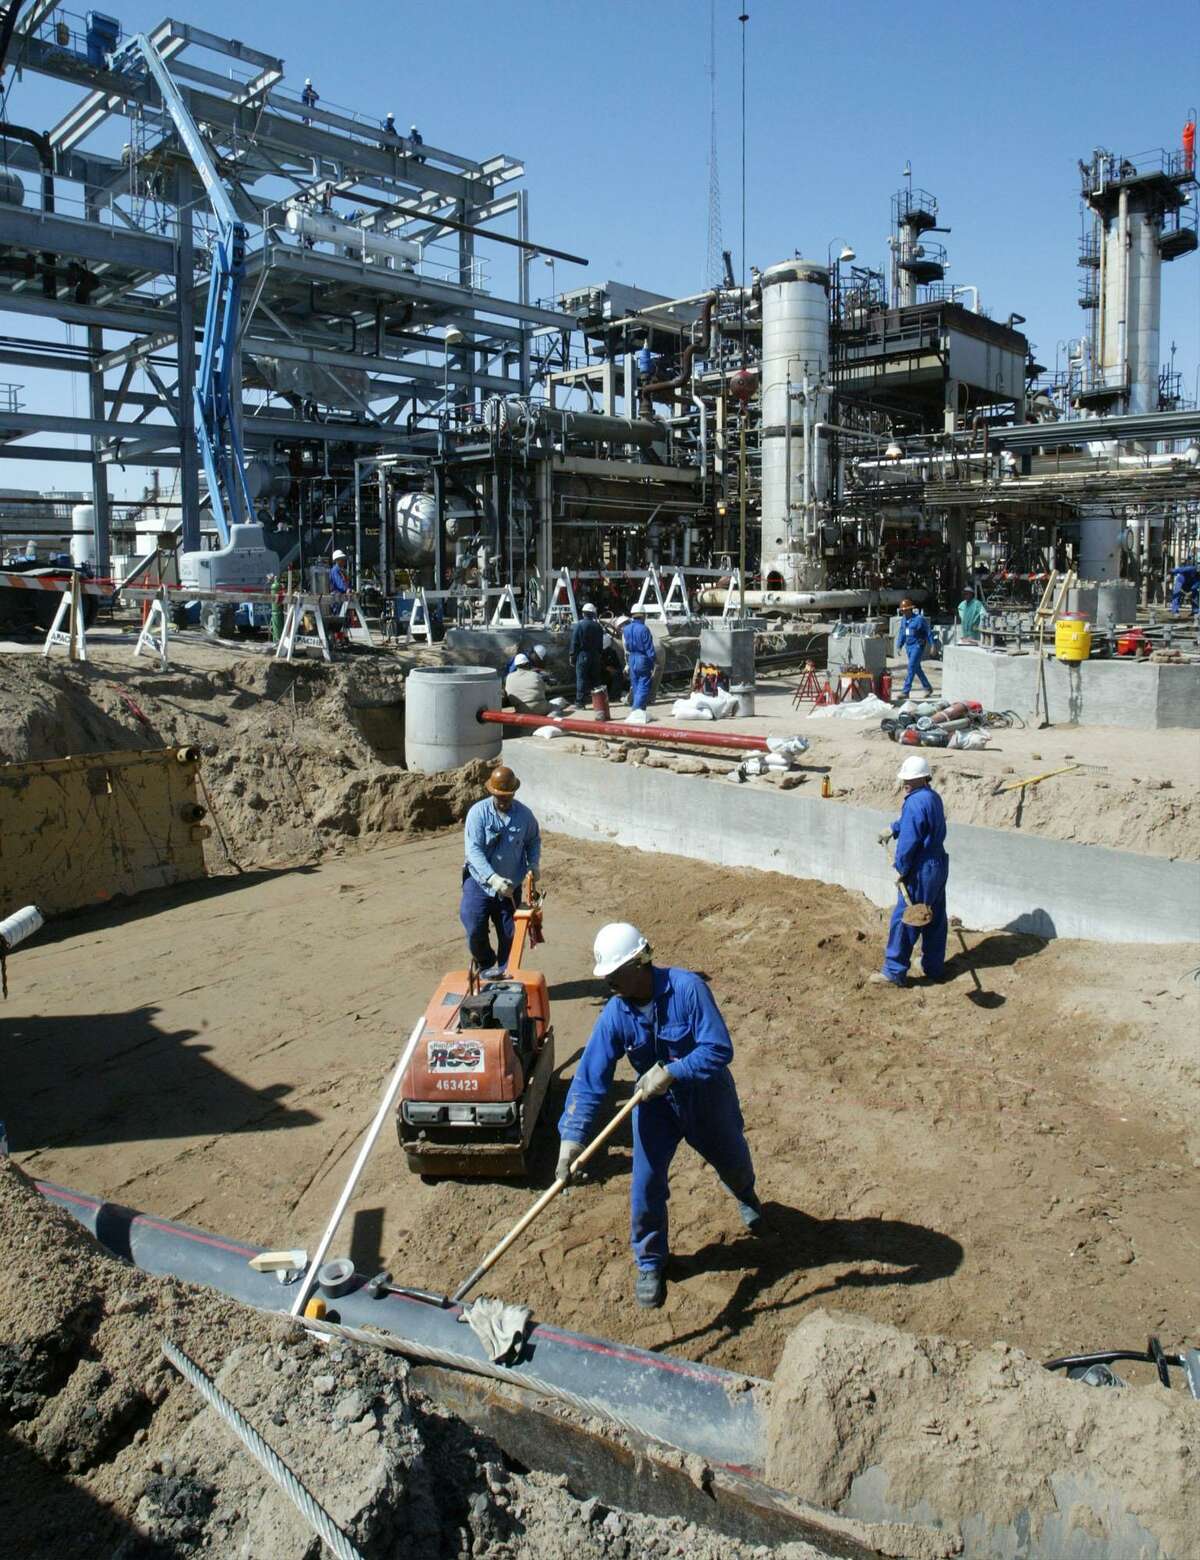 Workers build a concrete base to support a vessel in an ultra-low sulfur diesel fuel refining area at the Western Refining Inc. facility in El Paso in this 2005 file photo. Roughly 80 percent of Western Refining shares at a special meeting approved the $4.1 billion merger with Tesoro.